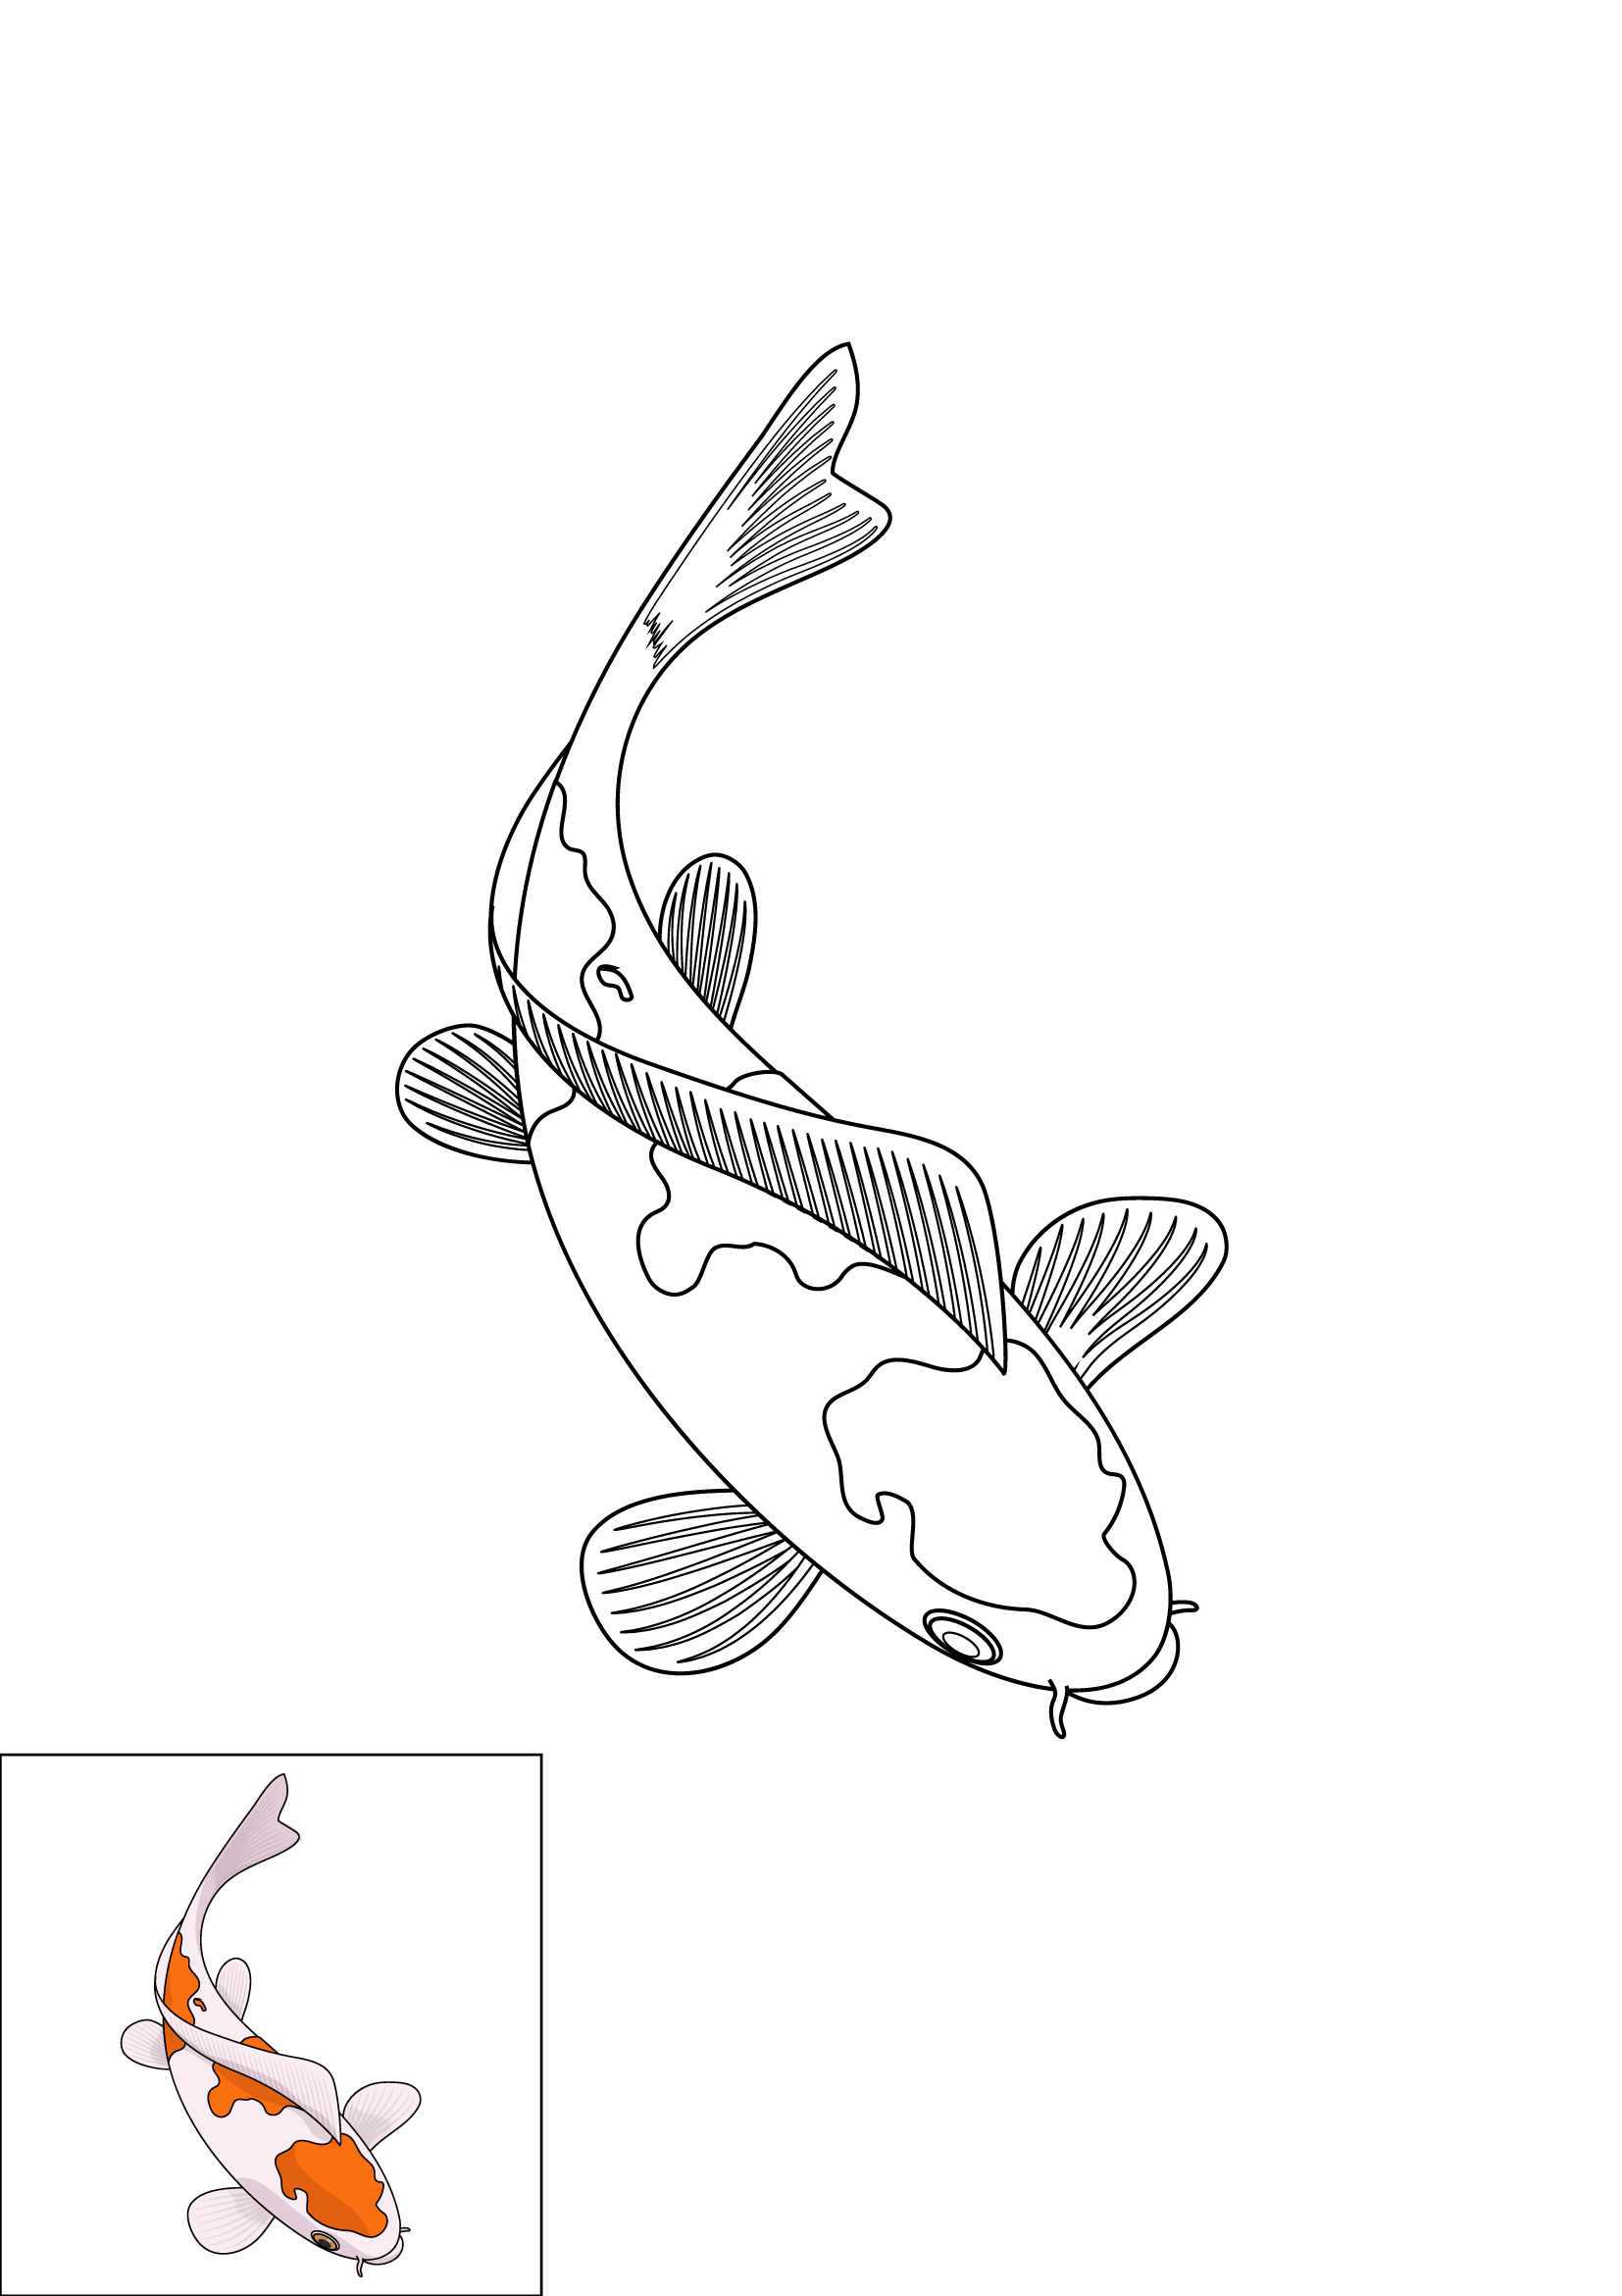 How to Draw A Koi Fish Step by Step Printable Color